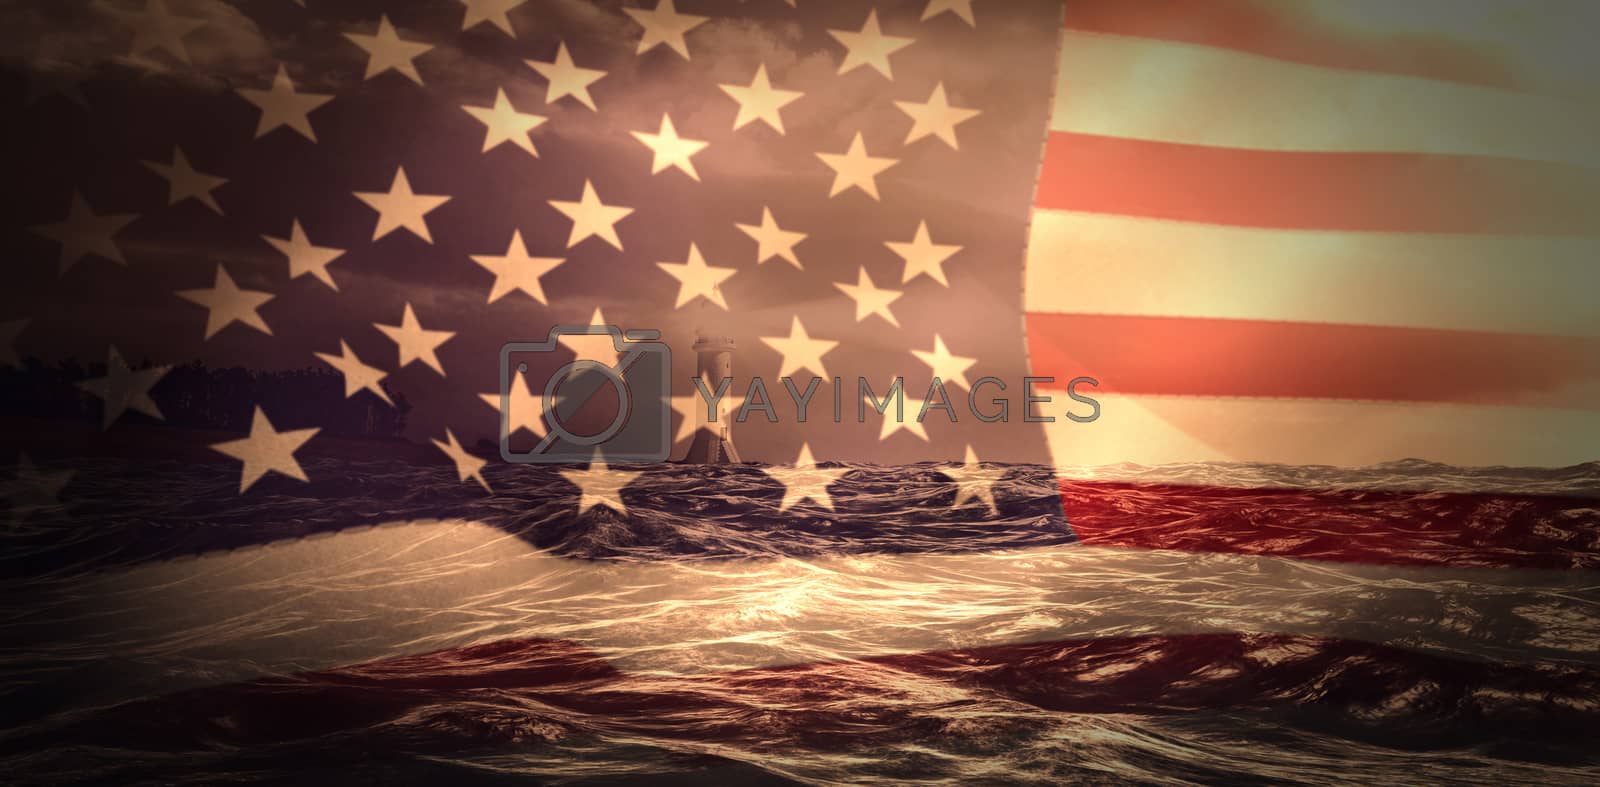 Royalty free image of Composite image of united states of america flag by Wavebreakmedia